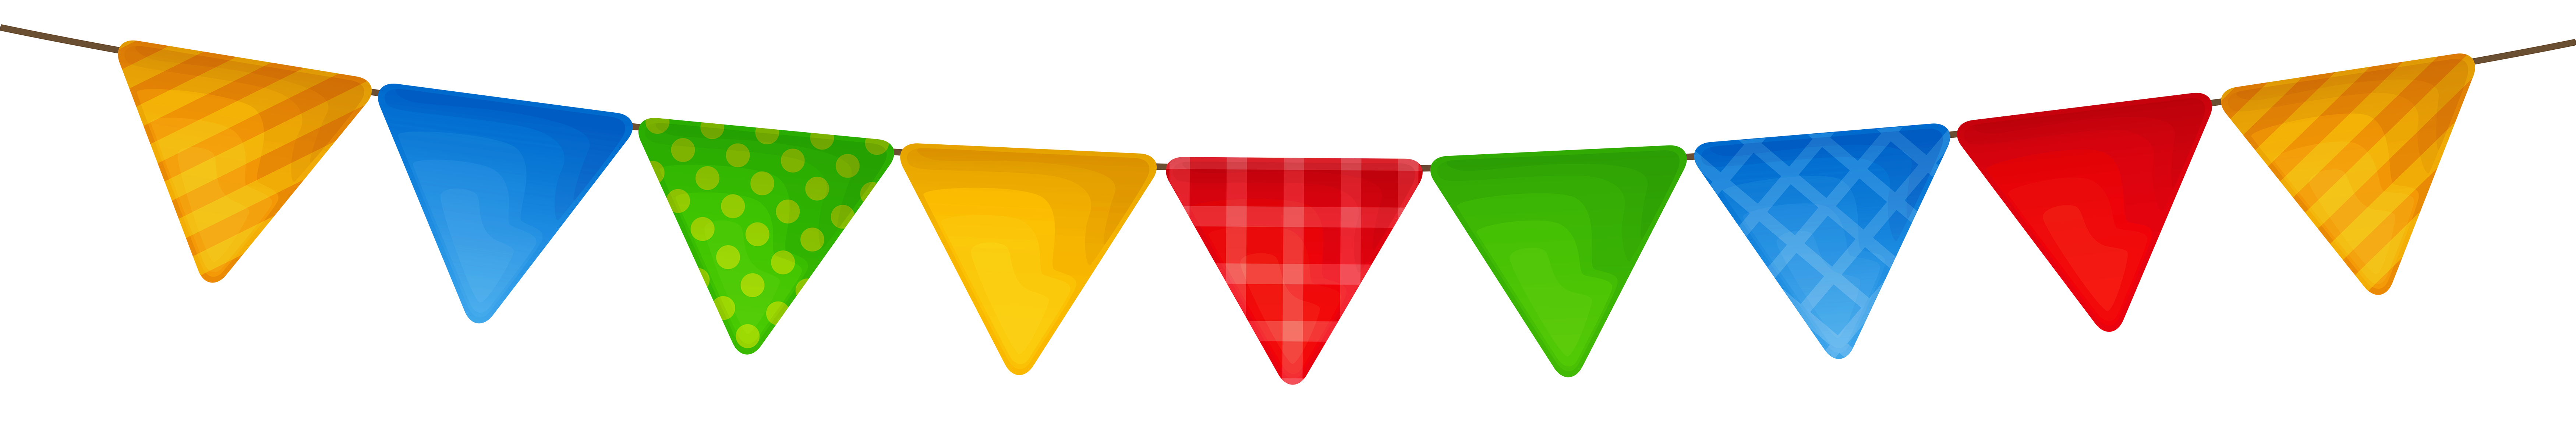 Streamers clipart triangle. Transparent colorful streamer png